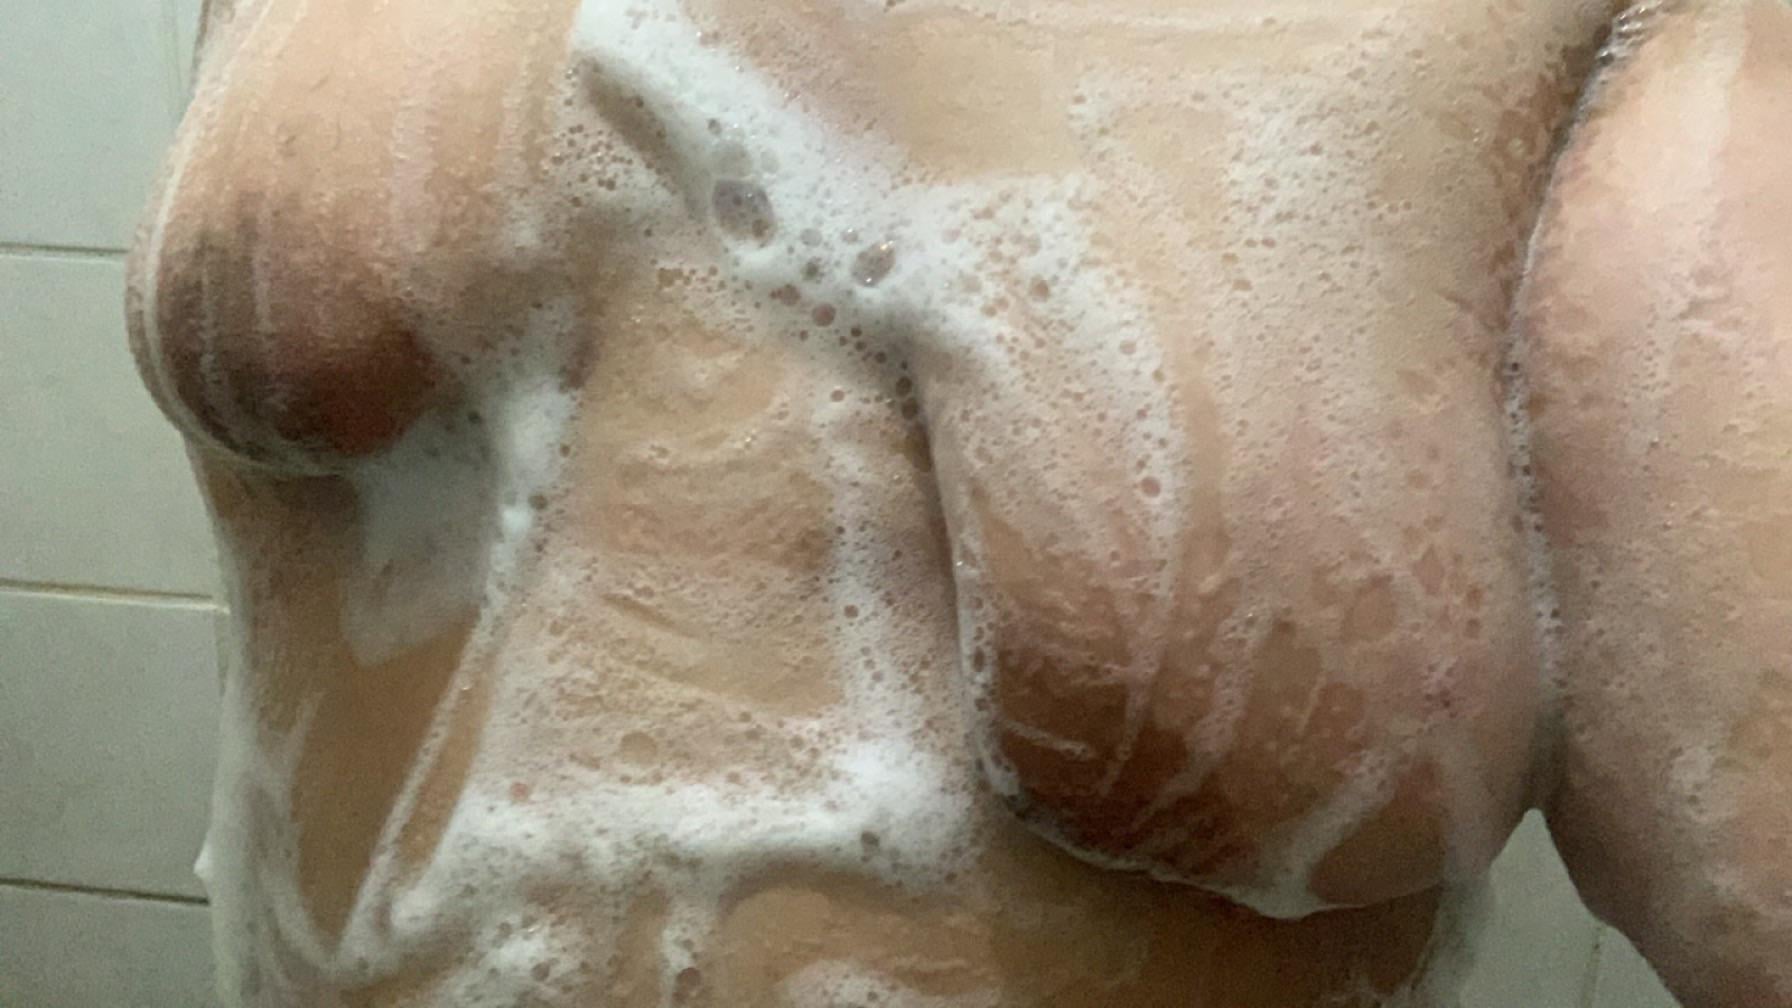 Can someone wash off this soap for me